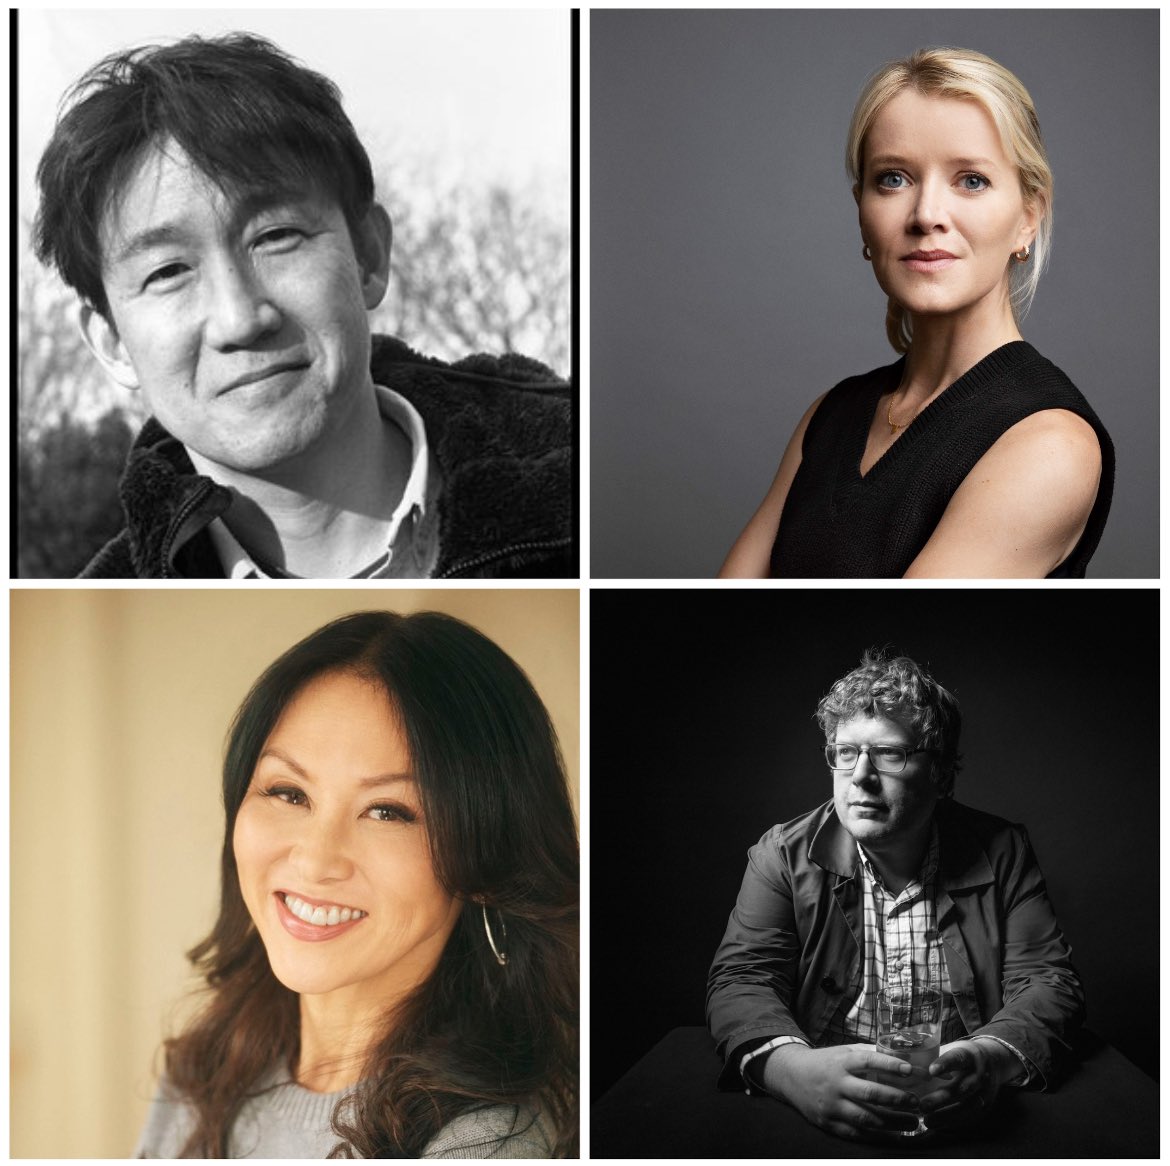 Kick off #NewYear2024 with us on Jan. 9 at 7PM @JoesPub for our first #SeriouslyEntertaining of the season! Featuring Ed Park, @JaneFerguson5, @amychua, and @NRothbaum sharing stories on #ALongStoryShort. Tickets at the link in our bio!